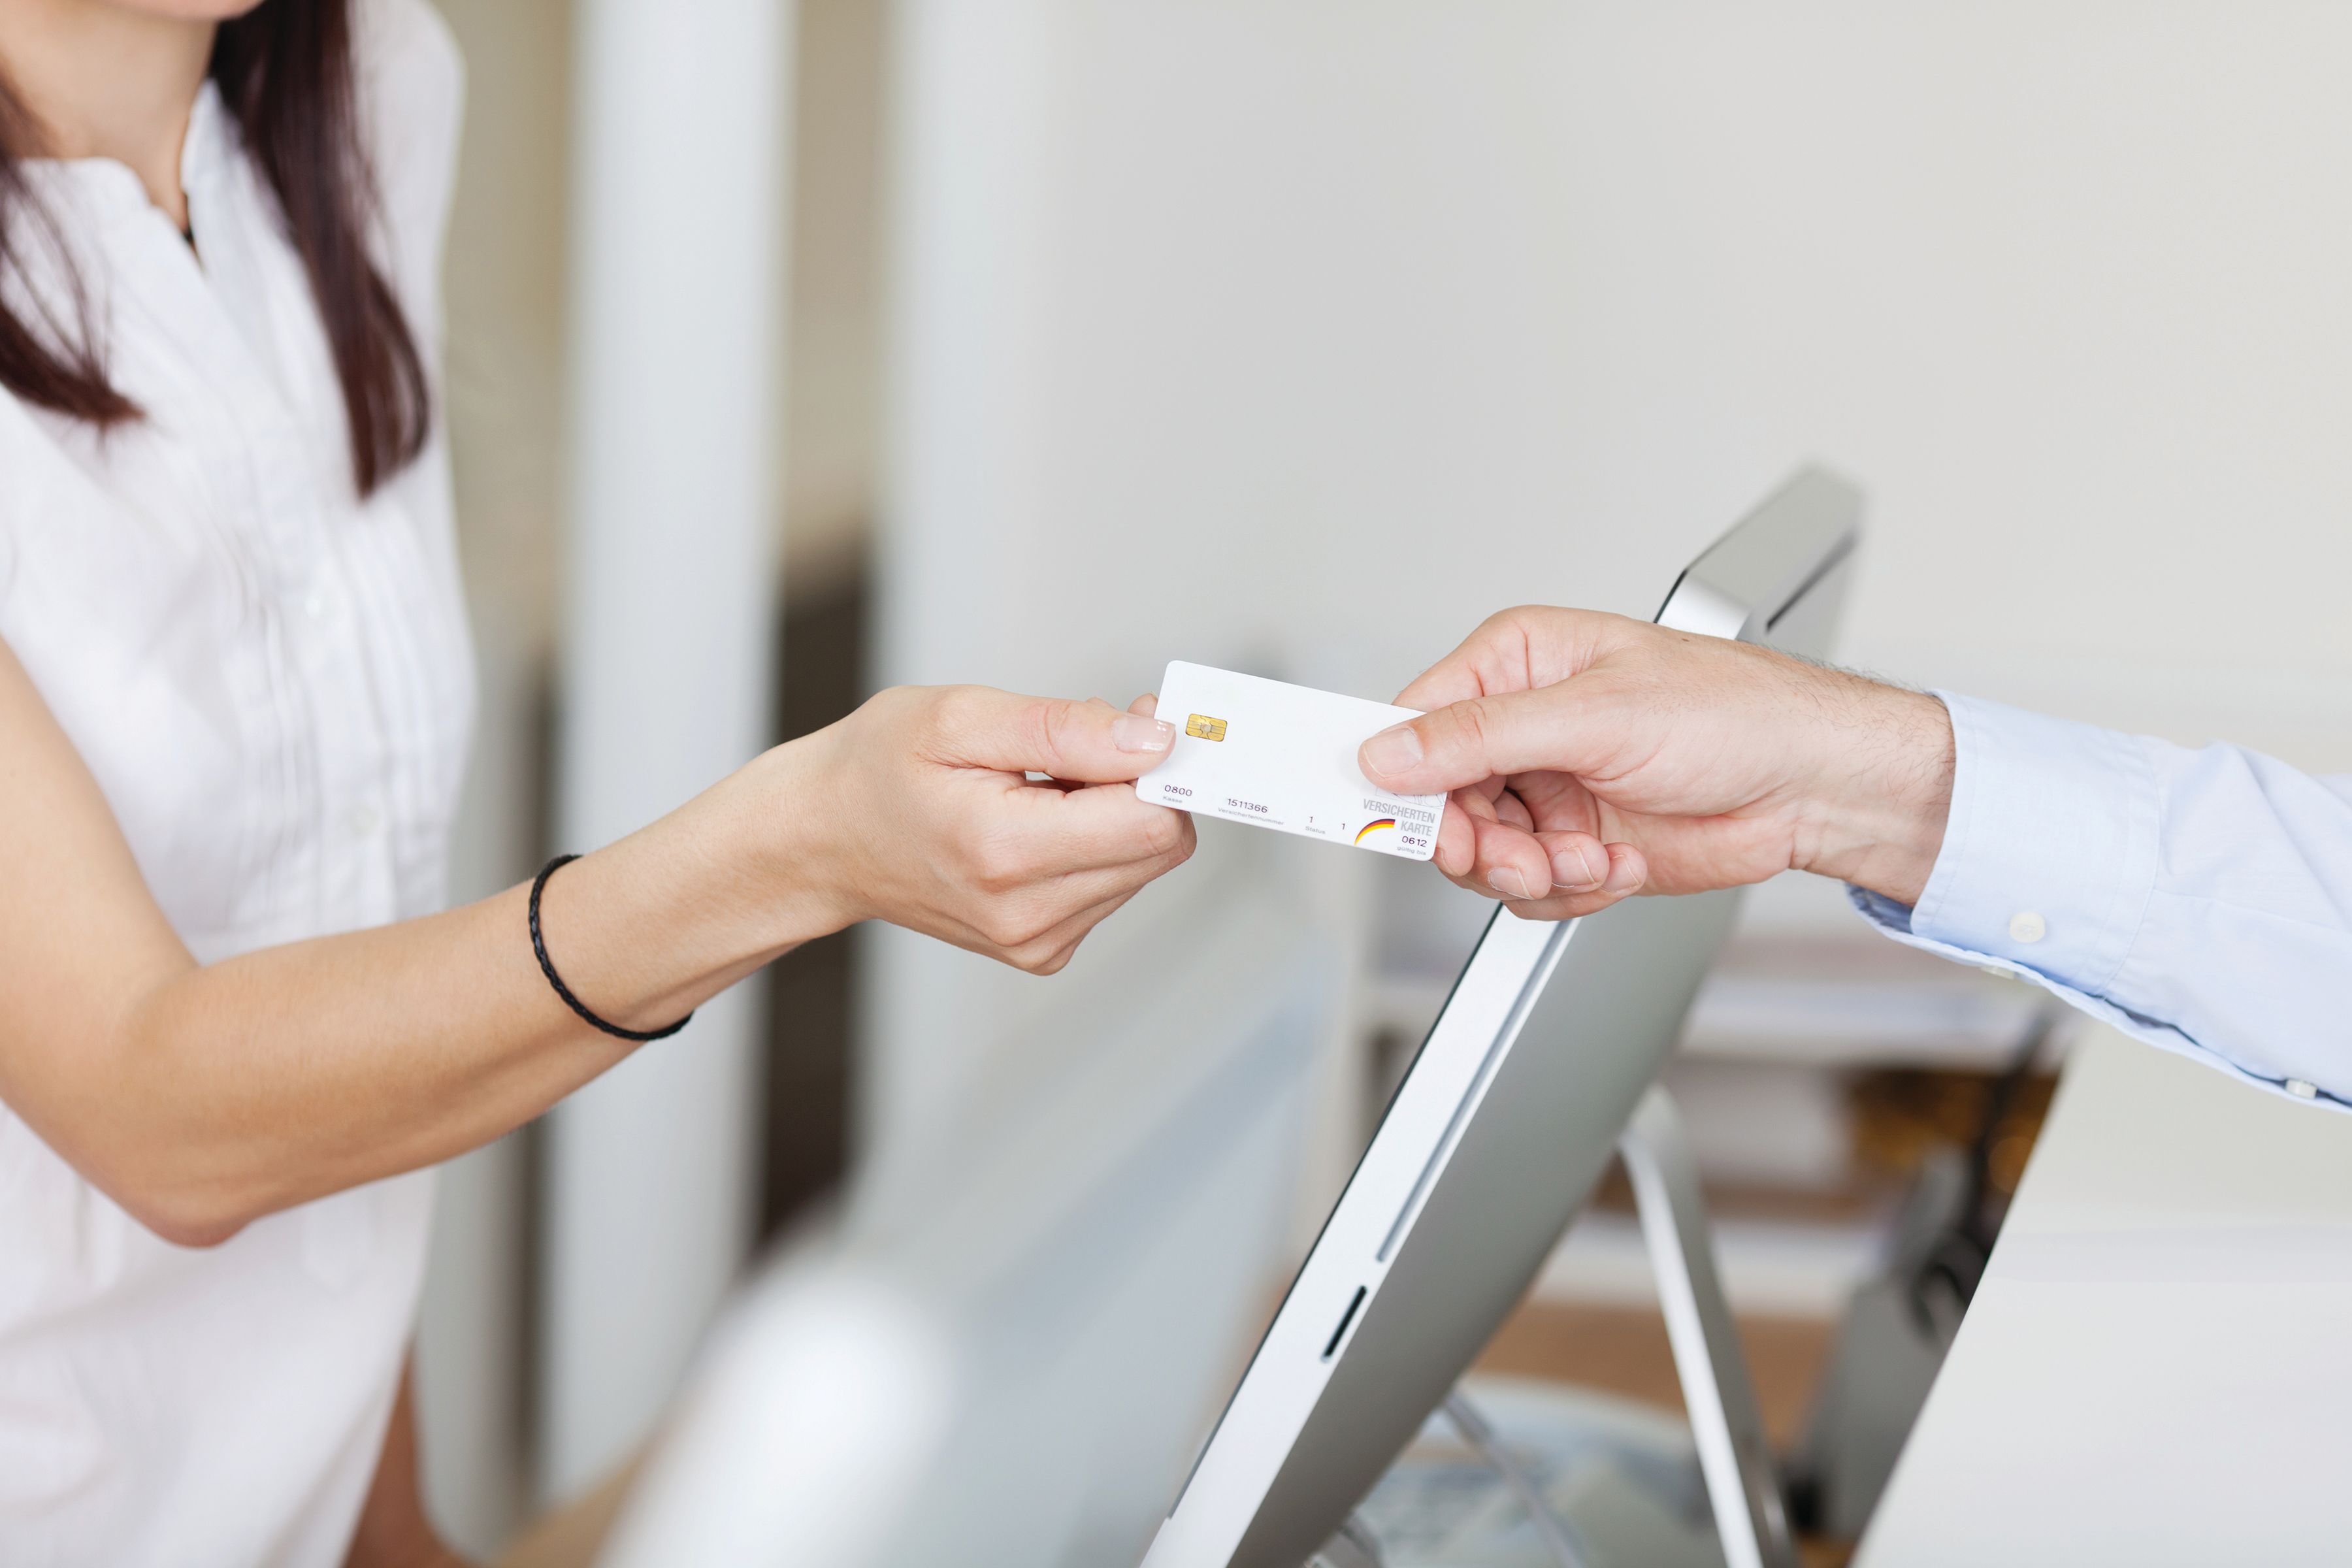 Break away from the credit card transaction trap.